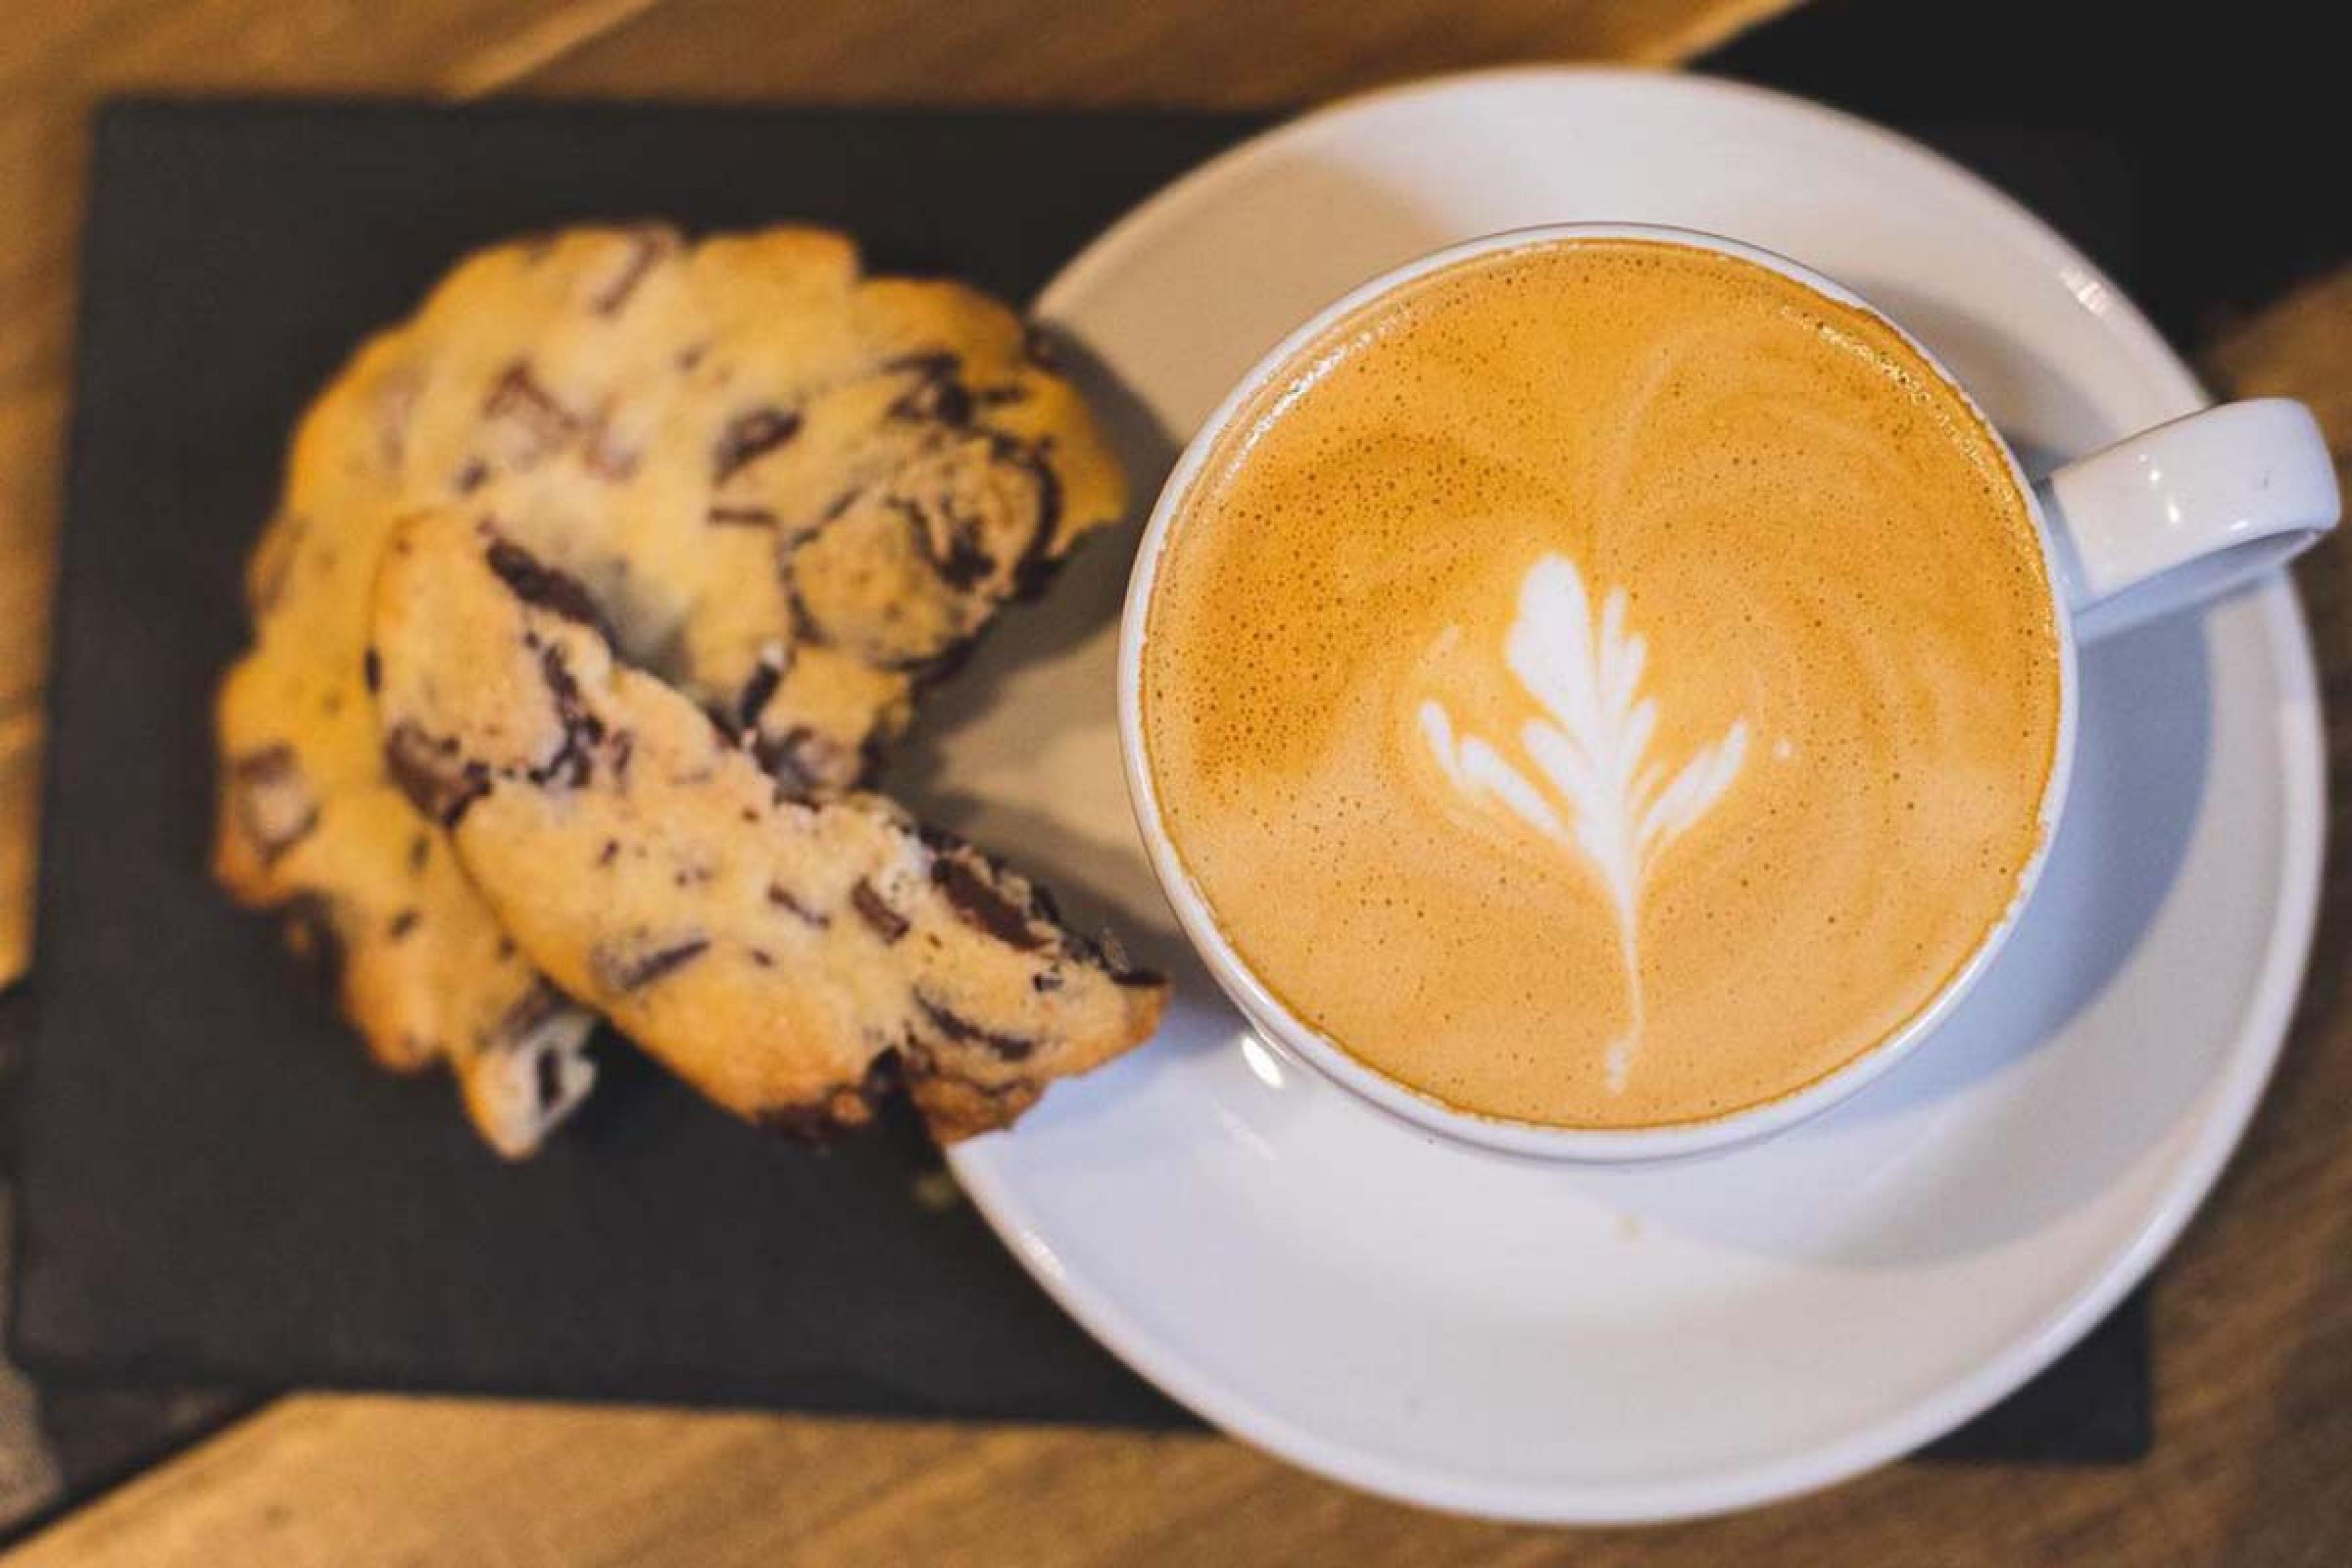 cappucino with a leaf design and a chocolate chip cookie